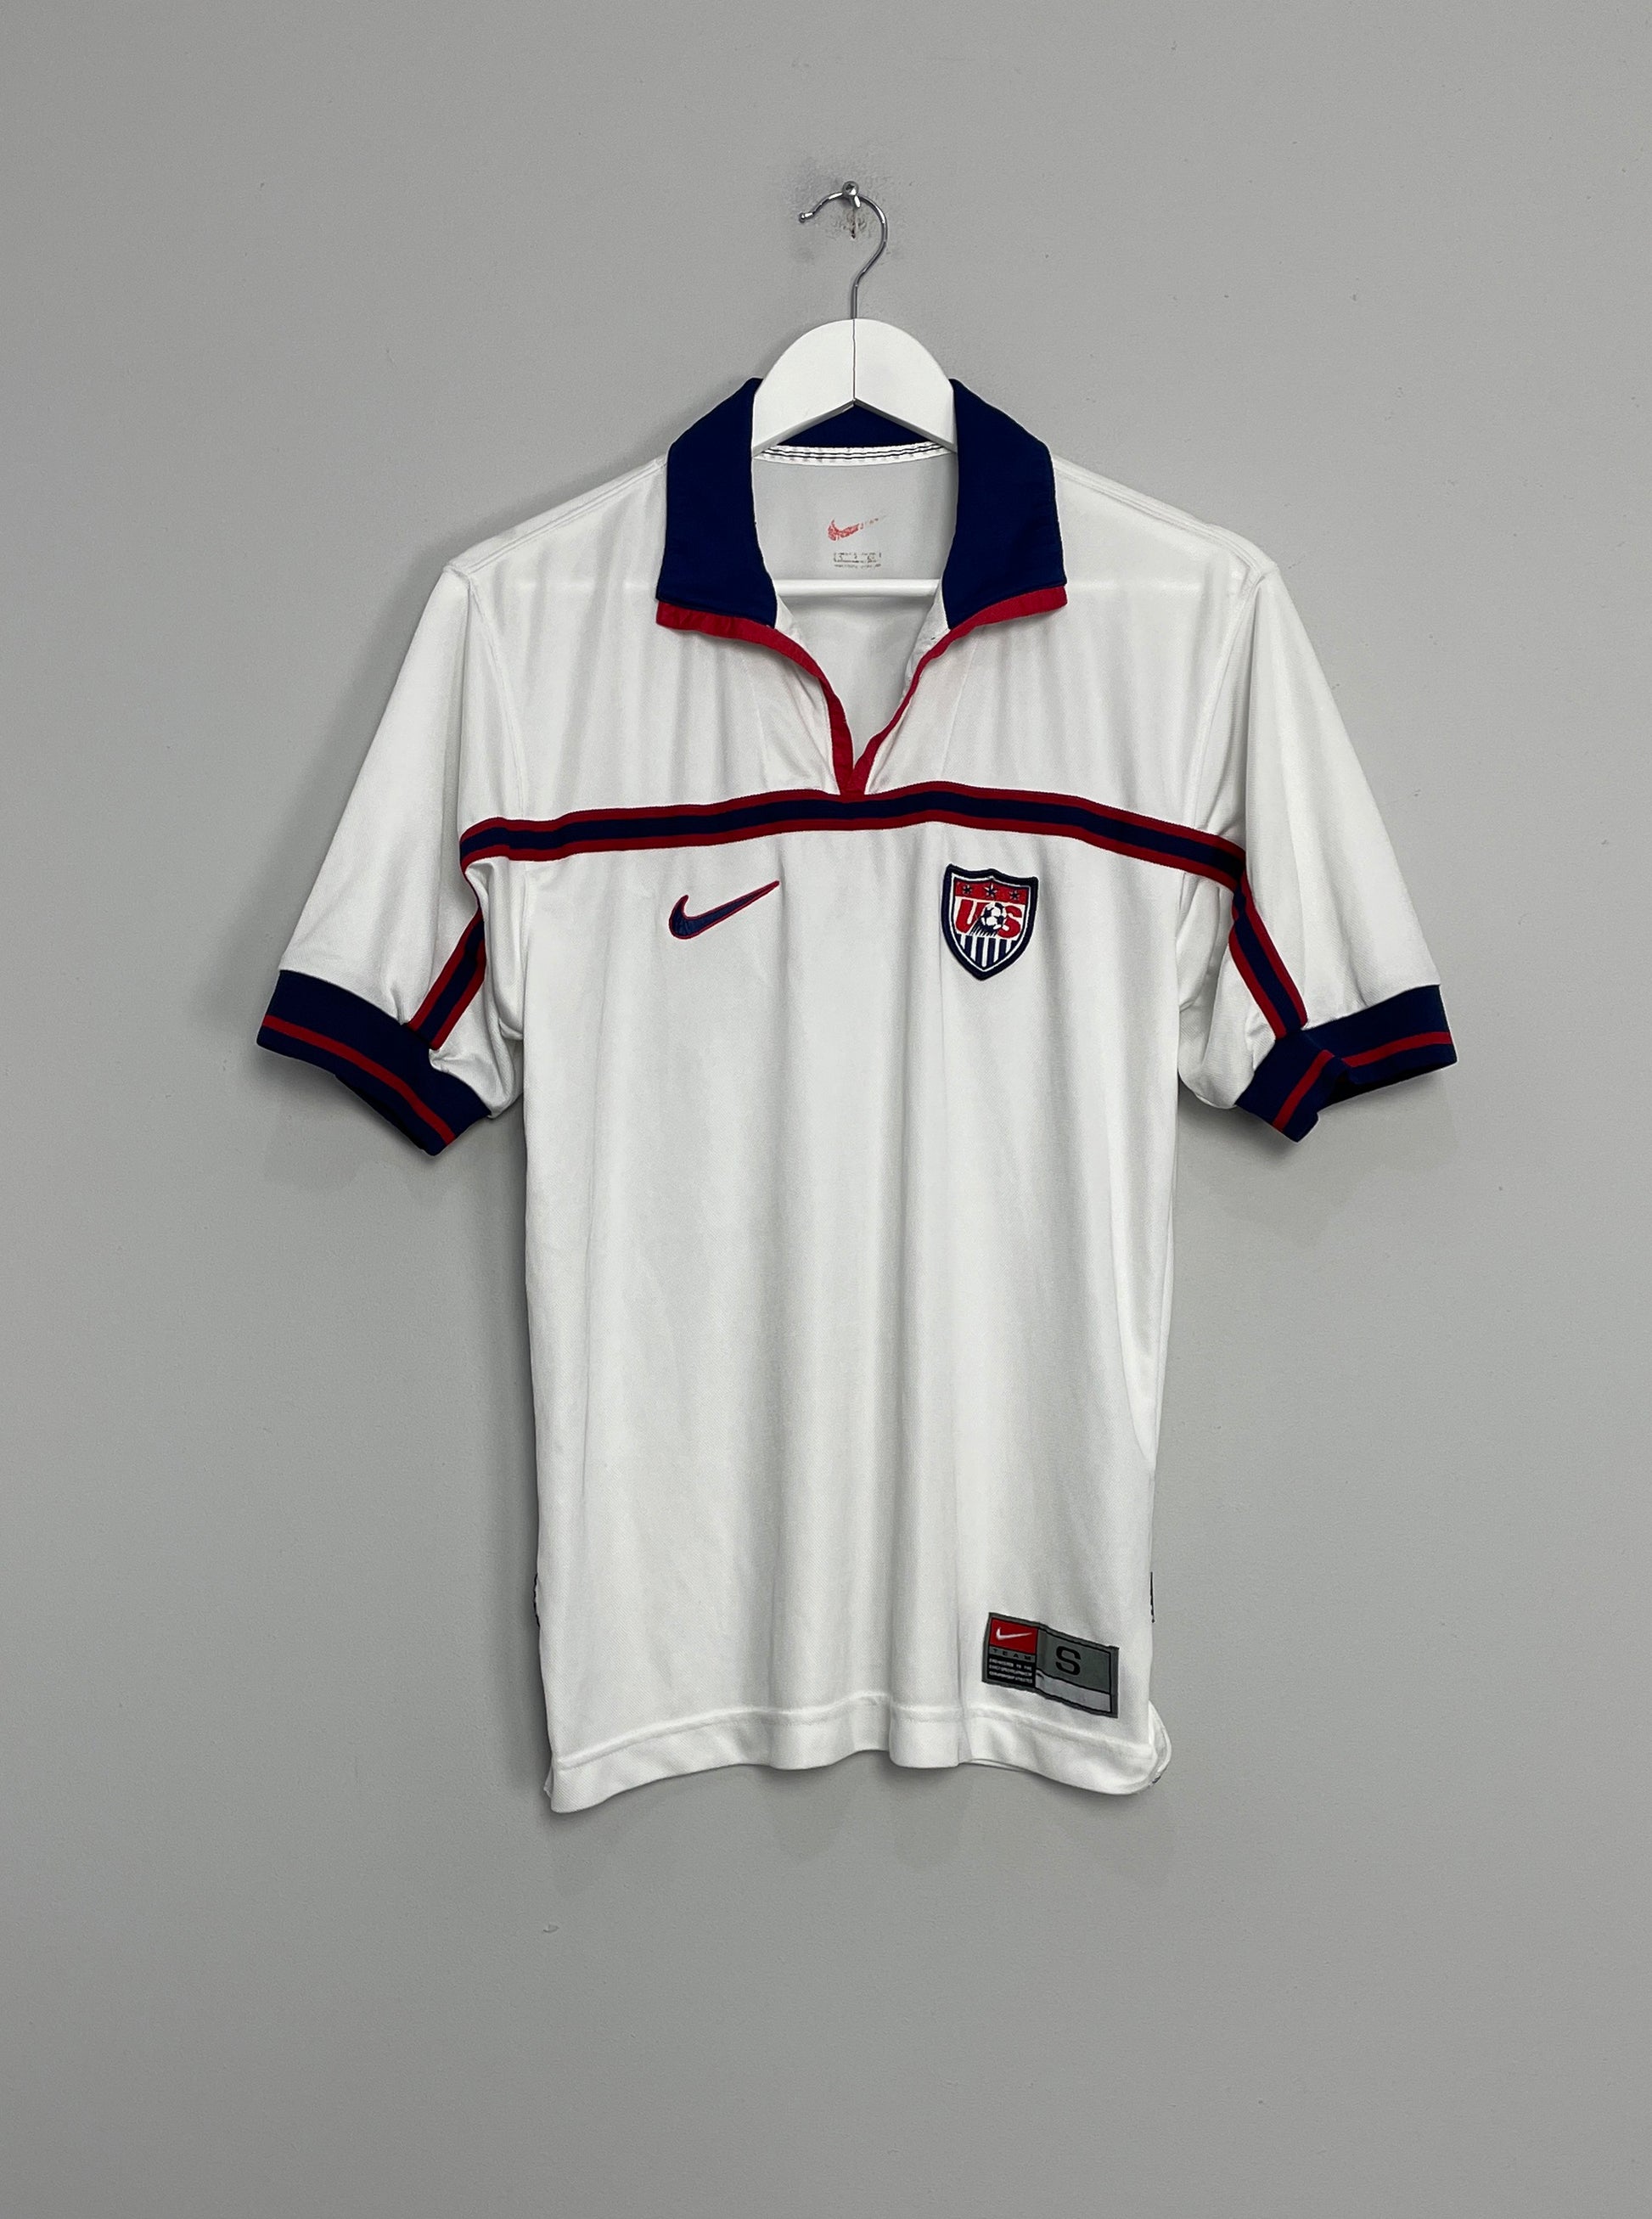 Image of the USA shirt from the 1998/00 season